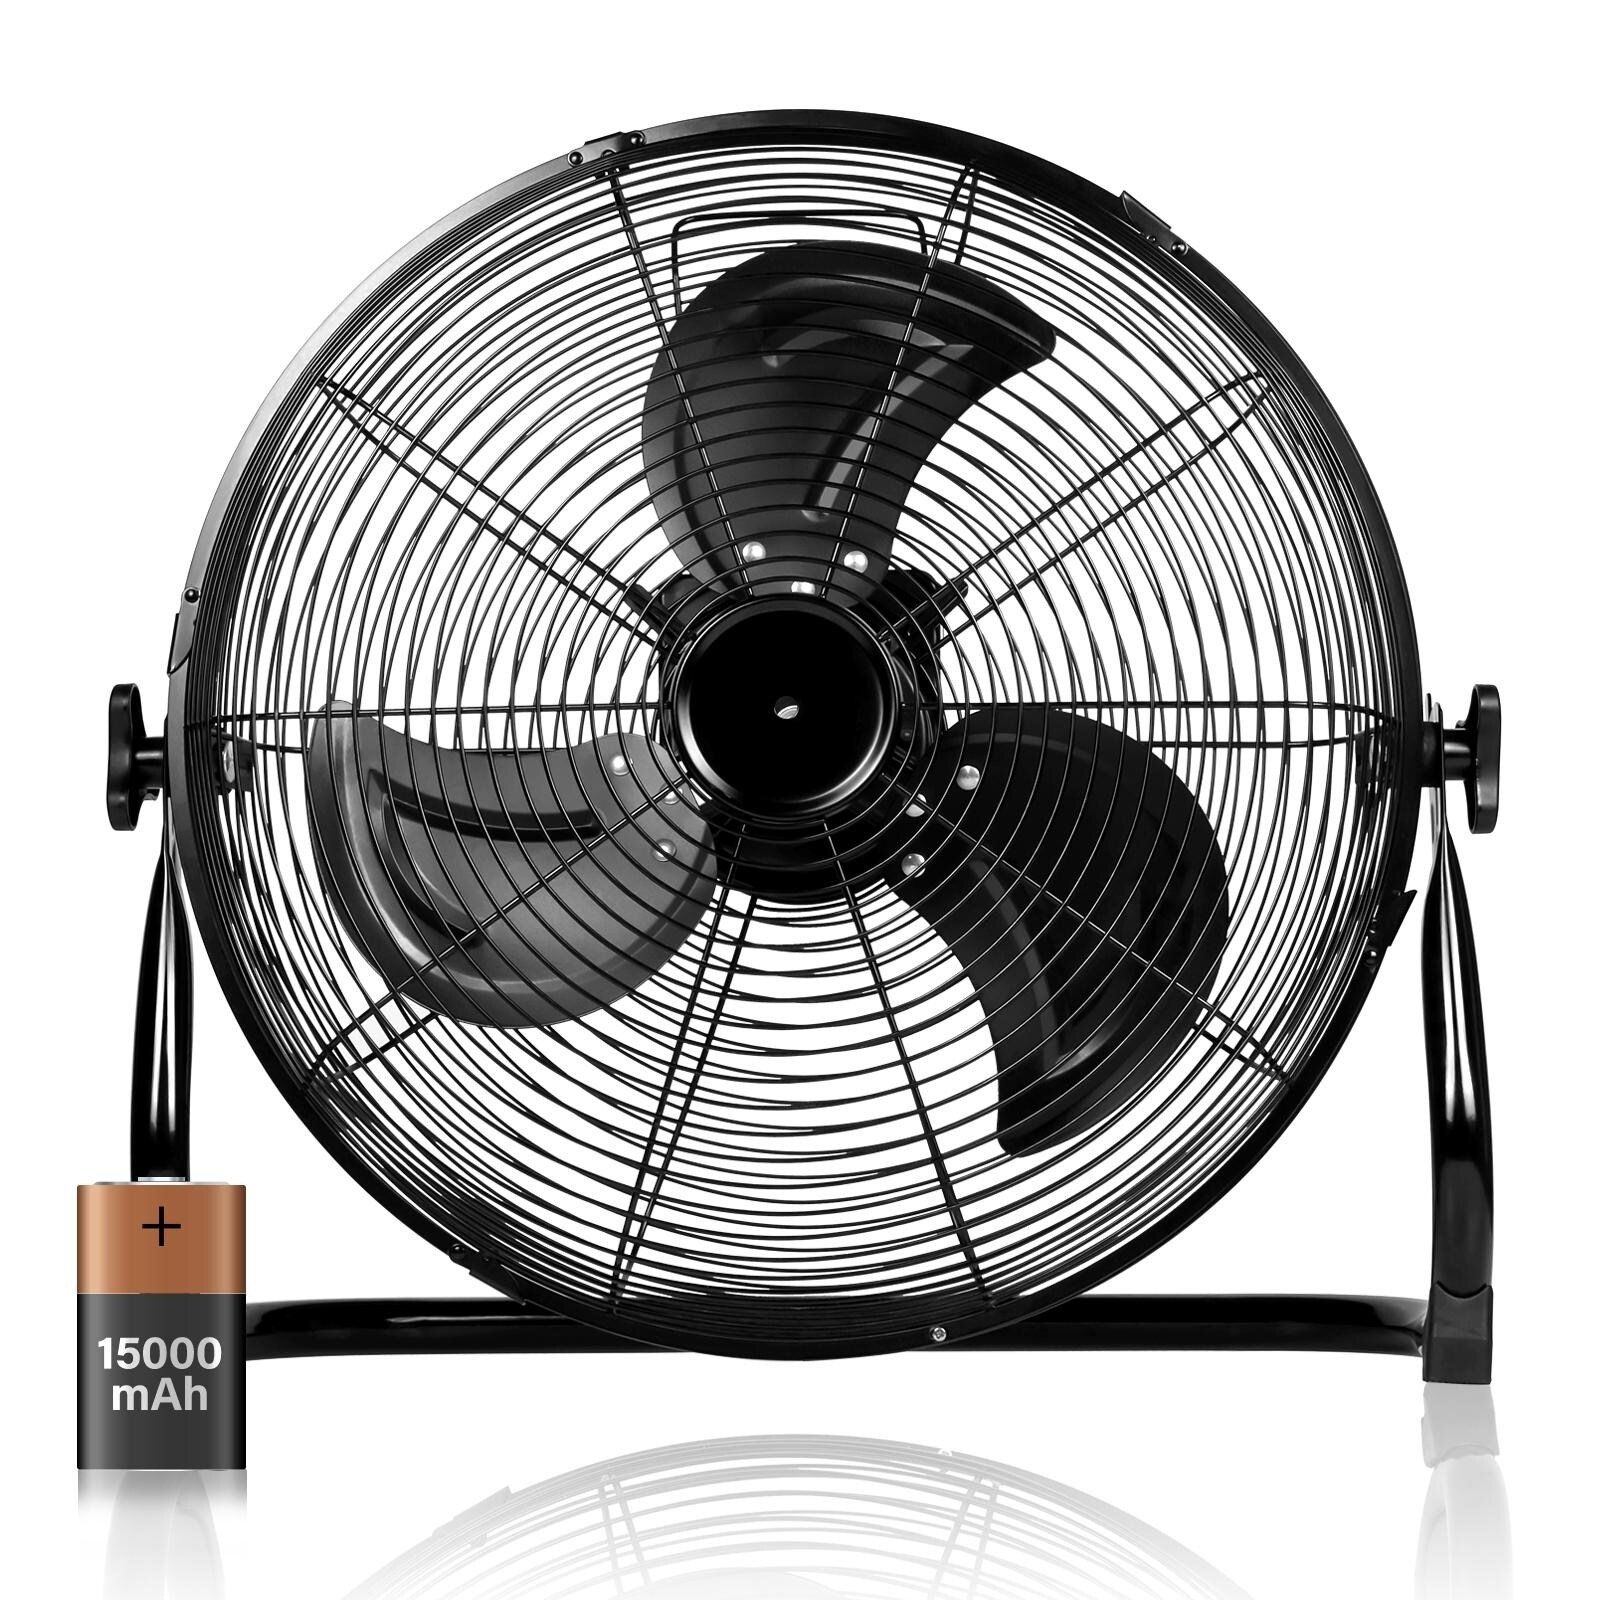 https://ak1.ostkcdn.com/images/products/is/images/direct/63fb293c331a62c67f01a03699ac12be47814034/Rechargeable-Cordless-Floor-Fan%2C-16-Inch%2C-High-Velocity-Floor-Fan-With-360-Degree-Tilt.jpg